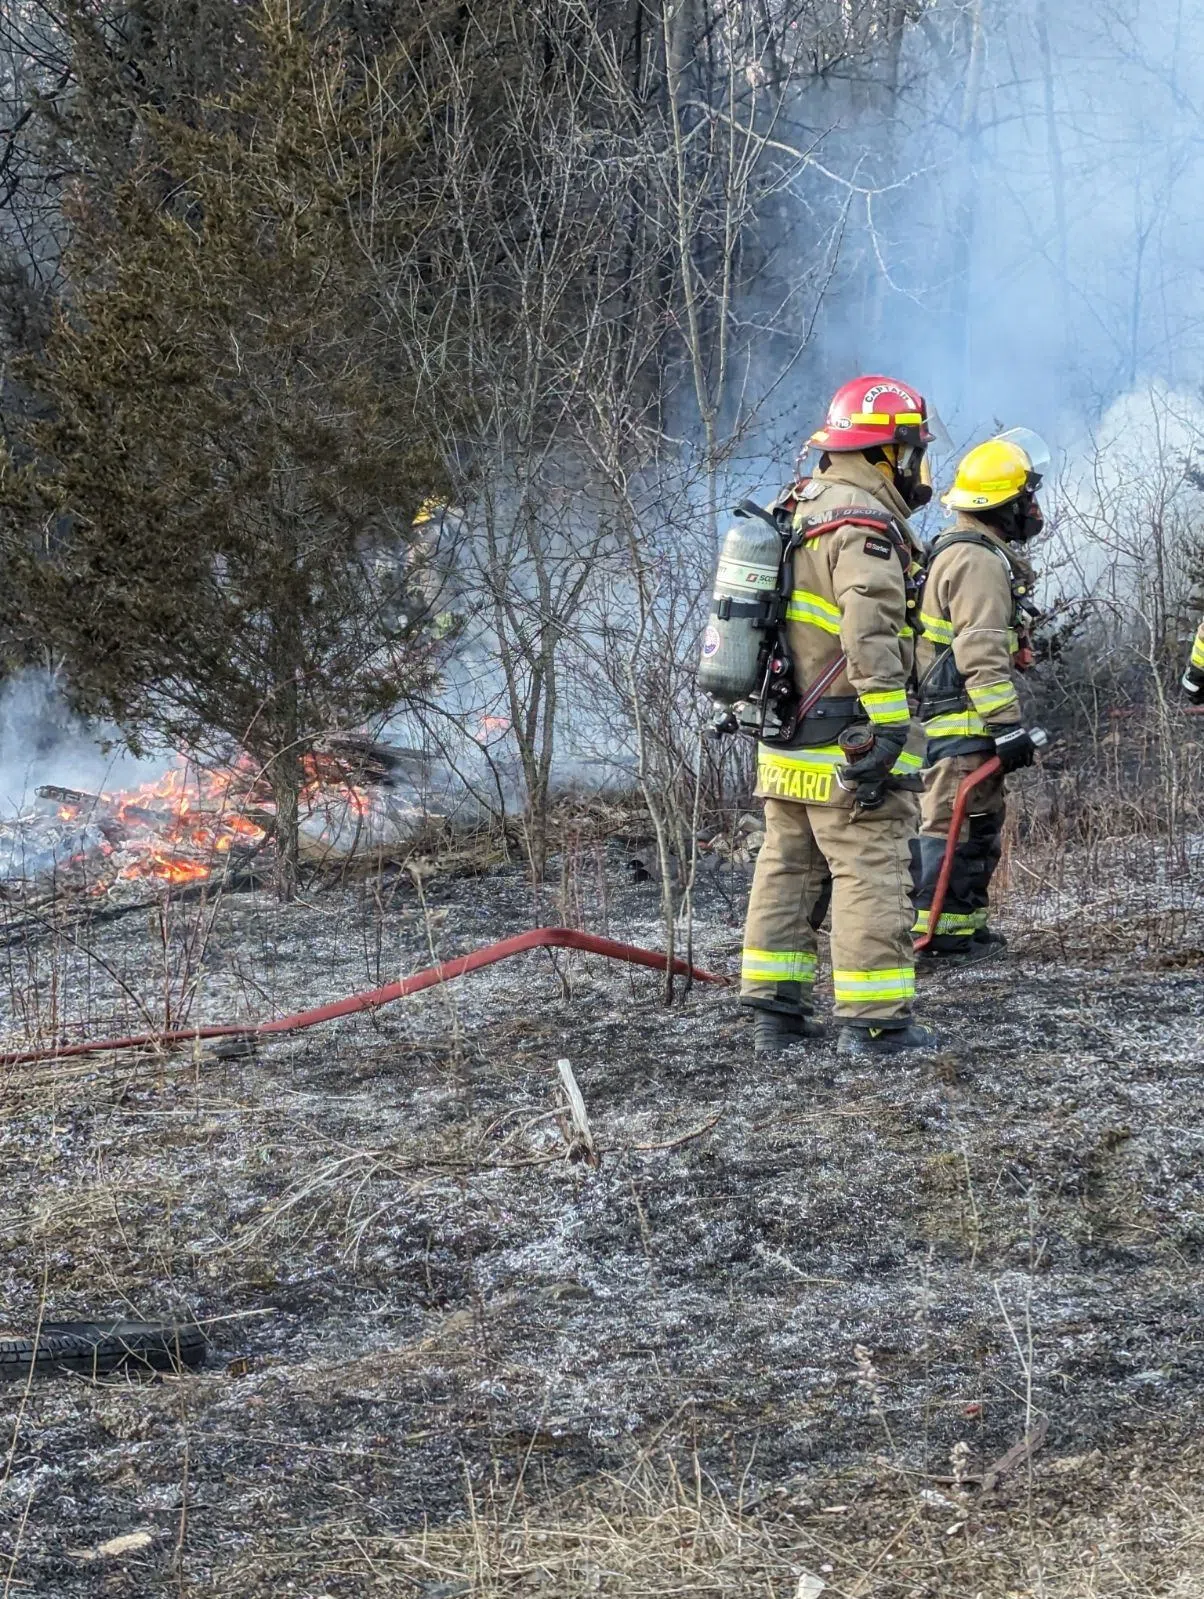 Three grass fires in two weeks for Quinte West Fire & Rescue